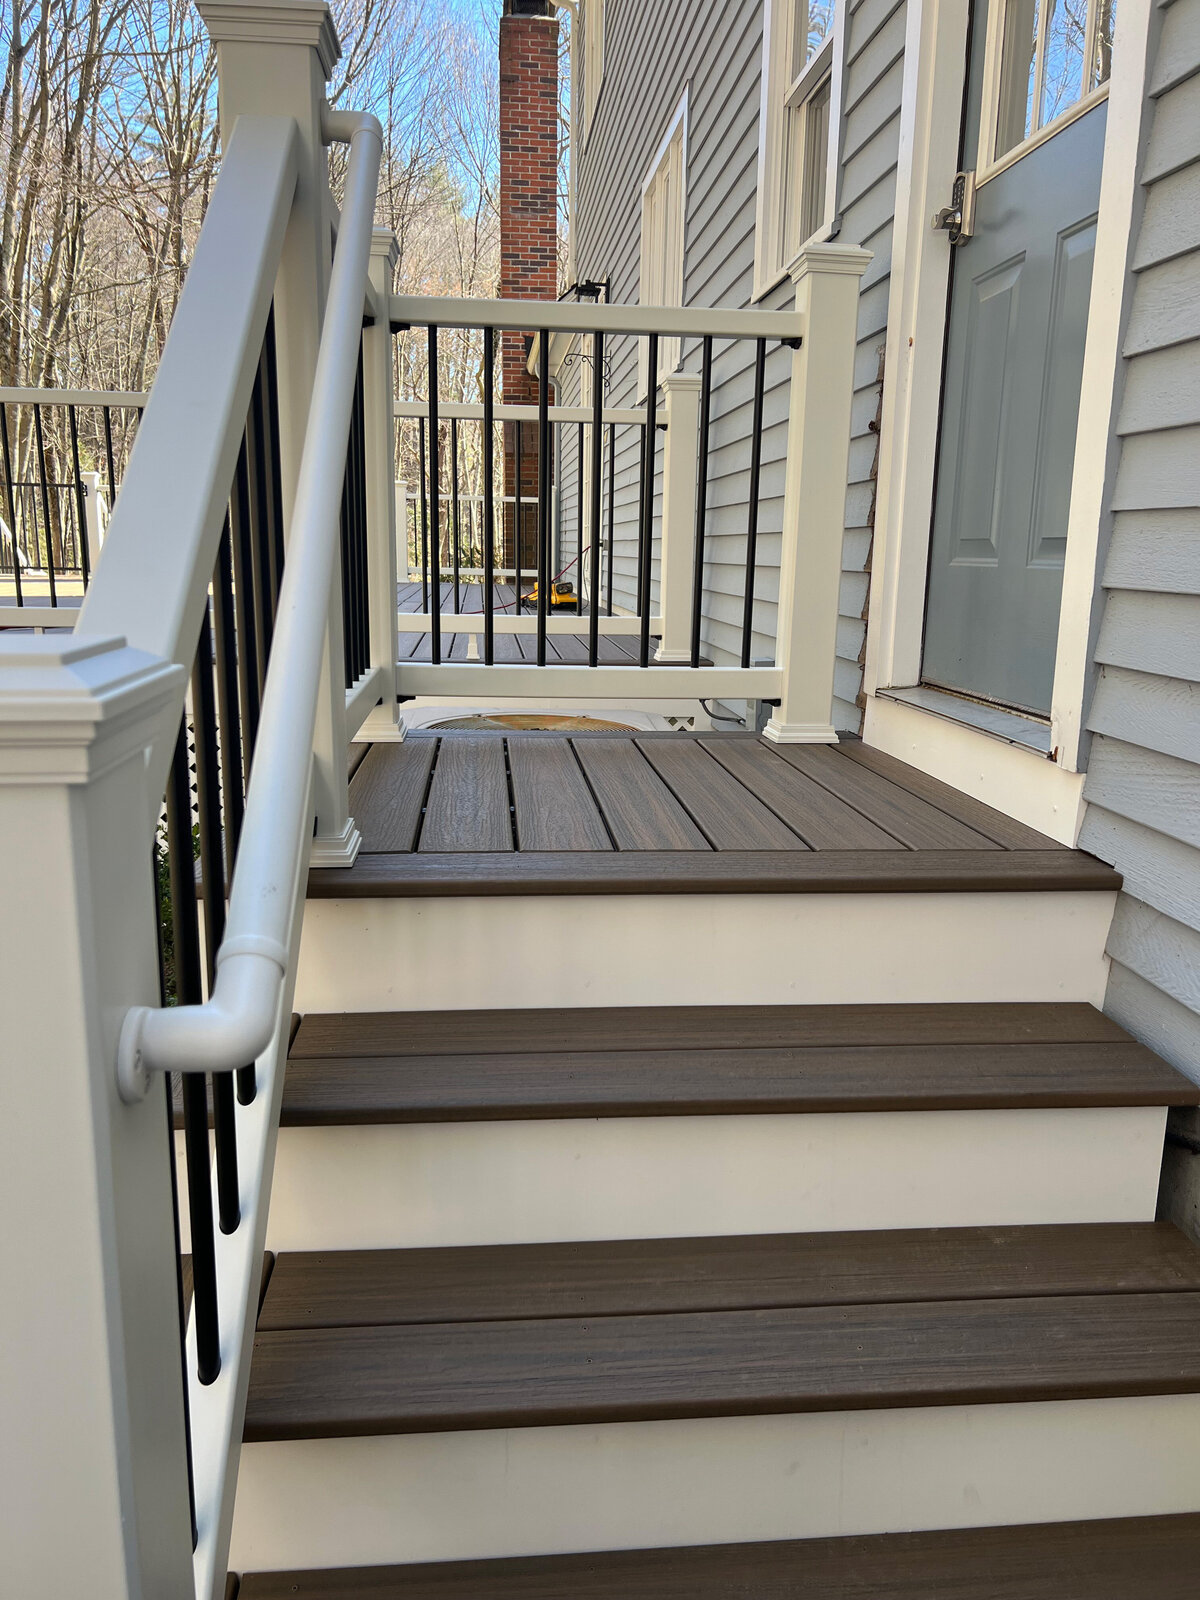 A look up a small set of stairs to a door with PVC railing and hand rail